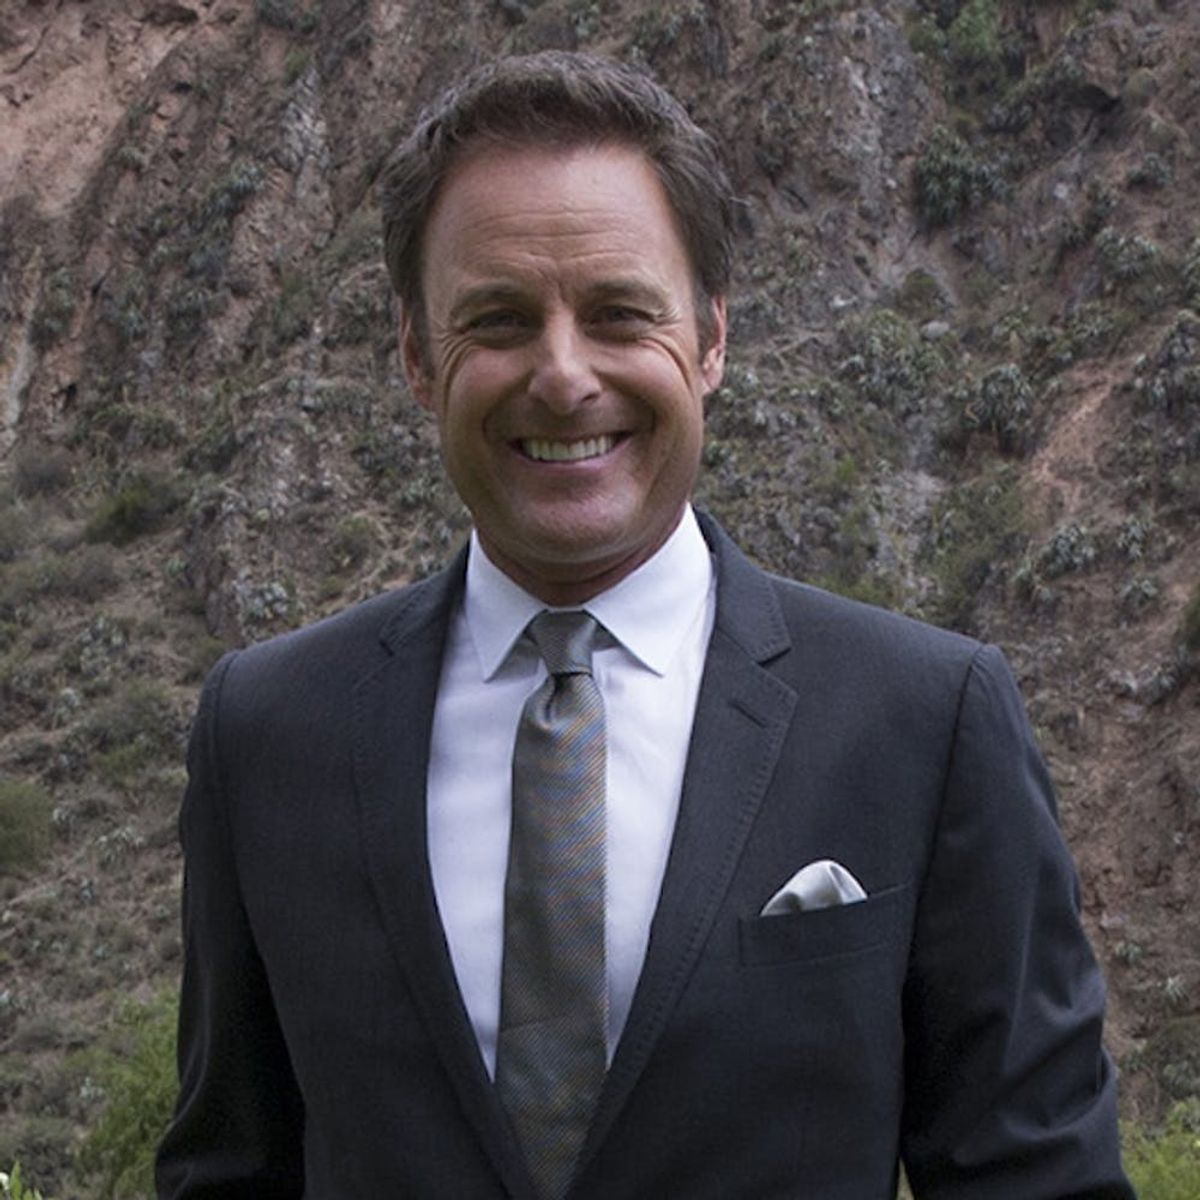 Chris Harrison Expects to ‘Catch Some Heat’ for That ‘Bachelor’ Finale